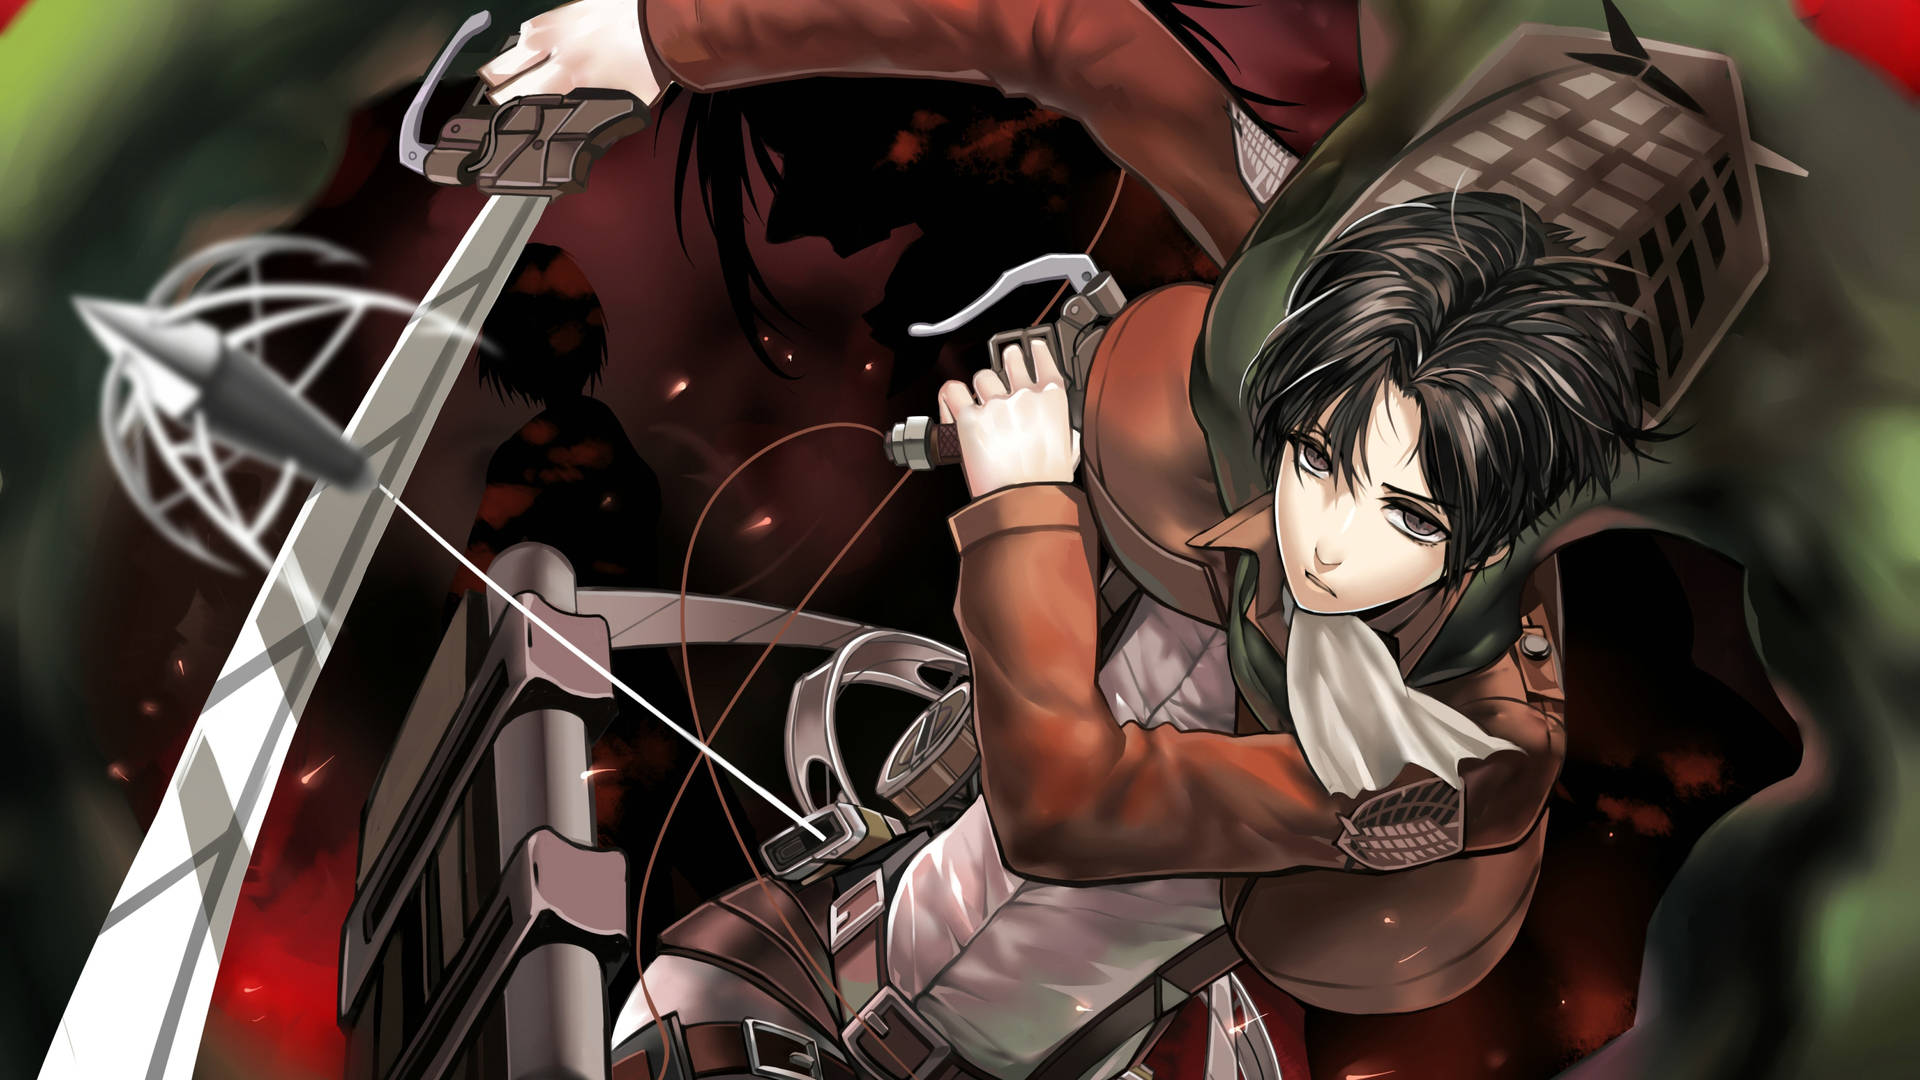 Levi Lunging With His Sword 4K Wallpaper